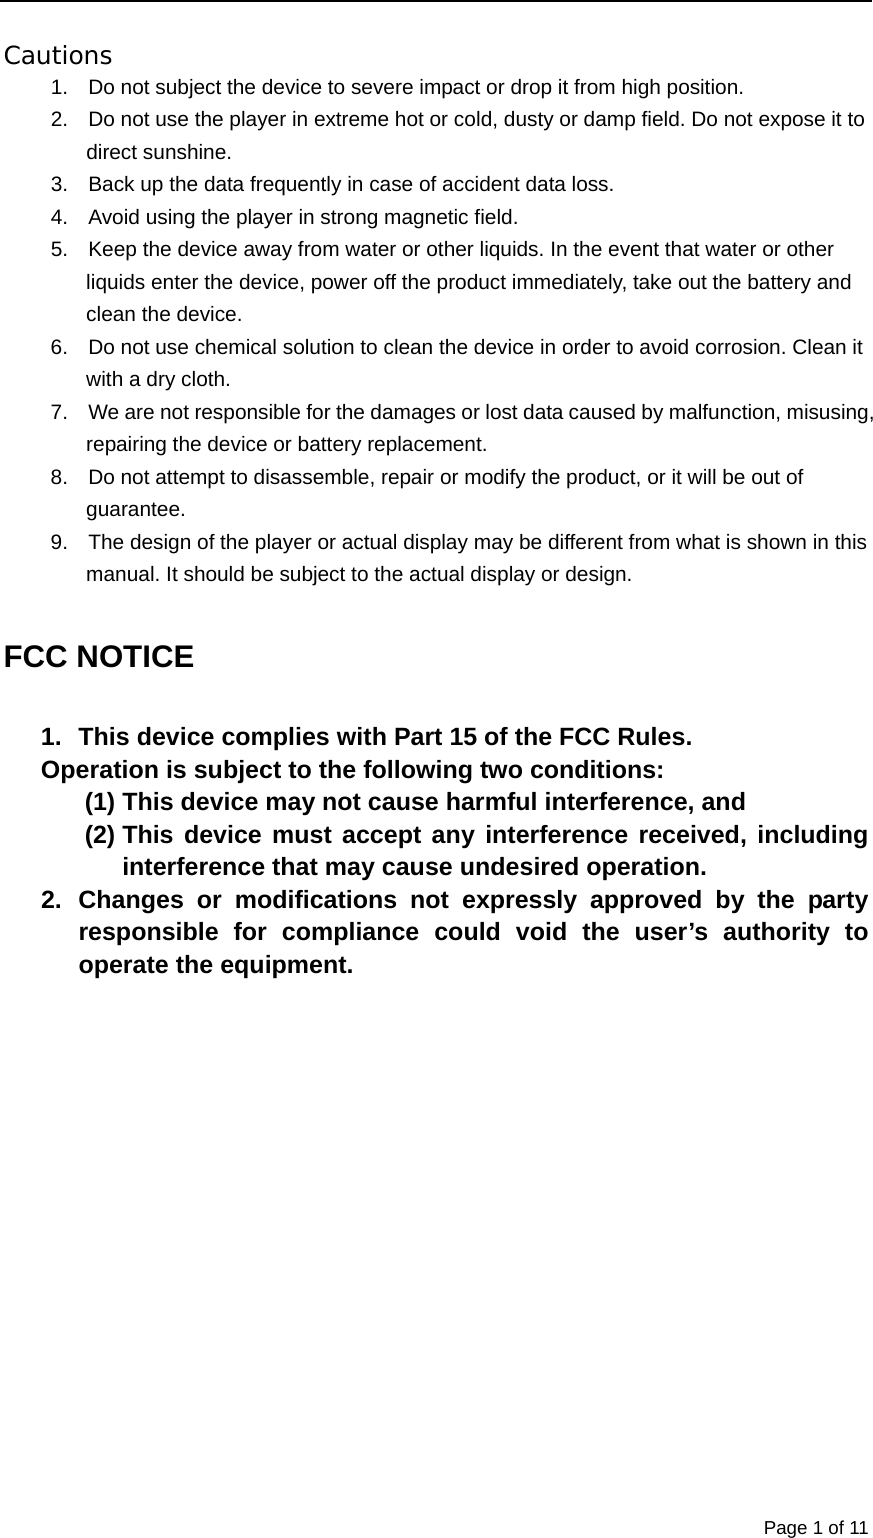  Page 1 of 11 Cautions 1.  Do not subject the device to severe impact or drop it from high position. 2.  Do not use the player in extreme hot or cold, dusty or damp field. Do not expose it to direct sunshine. 3.  Back up the data frequently in case of accident data loss. 4.  Avoid using the player in strong magnetic field. 5.  Keep the device away from water or other liquids. In the event that water or other liquids enter the device, power off the product immediately, take out the battery and clean the device. 6.  Do not use chemical solution to clean the device in order to avoid corrosion. Clean it with a dry cloth. 7.  We are not responsible for the damages or lost data caused by malfunction, misusing, repairing the device or battery replacement. 8.  Do not attempt to disassemble, repair or modify the product, or it will be out of guarantee. 9.  The design of the player or actual display may be different from what is shown in this manual. It should be subject to the actual display or design.  FCC NOTICE  1.  This device complies with Part 15 of the FCC Rules. Operation is subject to the following two conditions: (1) This device may not cause harmful interference, and (2) This device must accept any interference received, including interference that may cause undesired operation. 2. Changes or modifications not expressly approved by the party responsible for compliance could void the user’s authority to operate the equipment.                